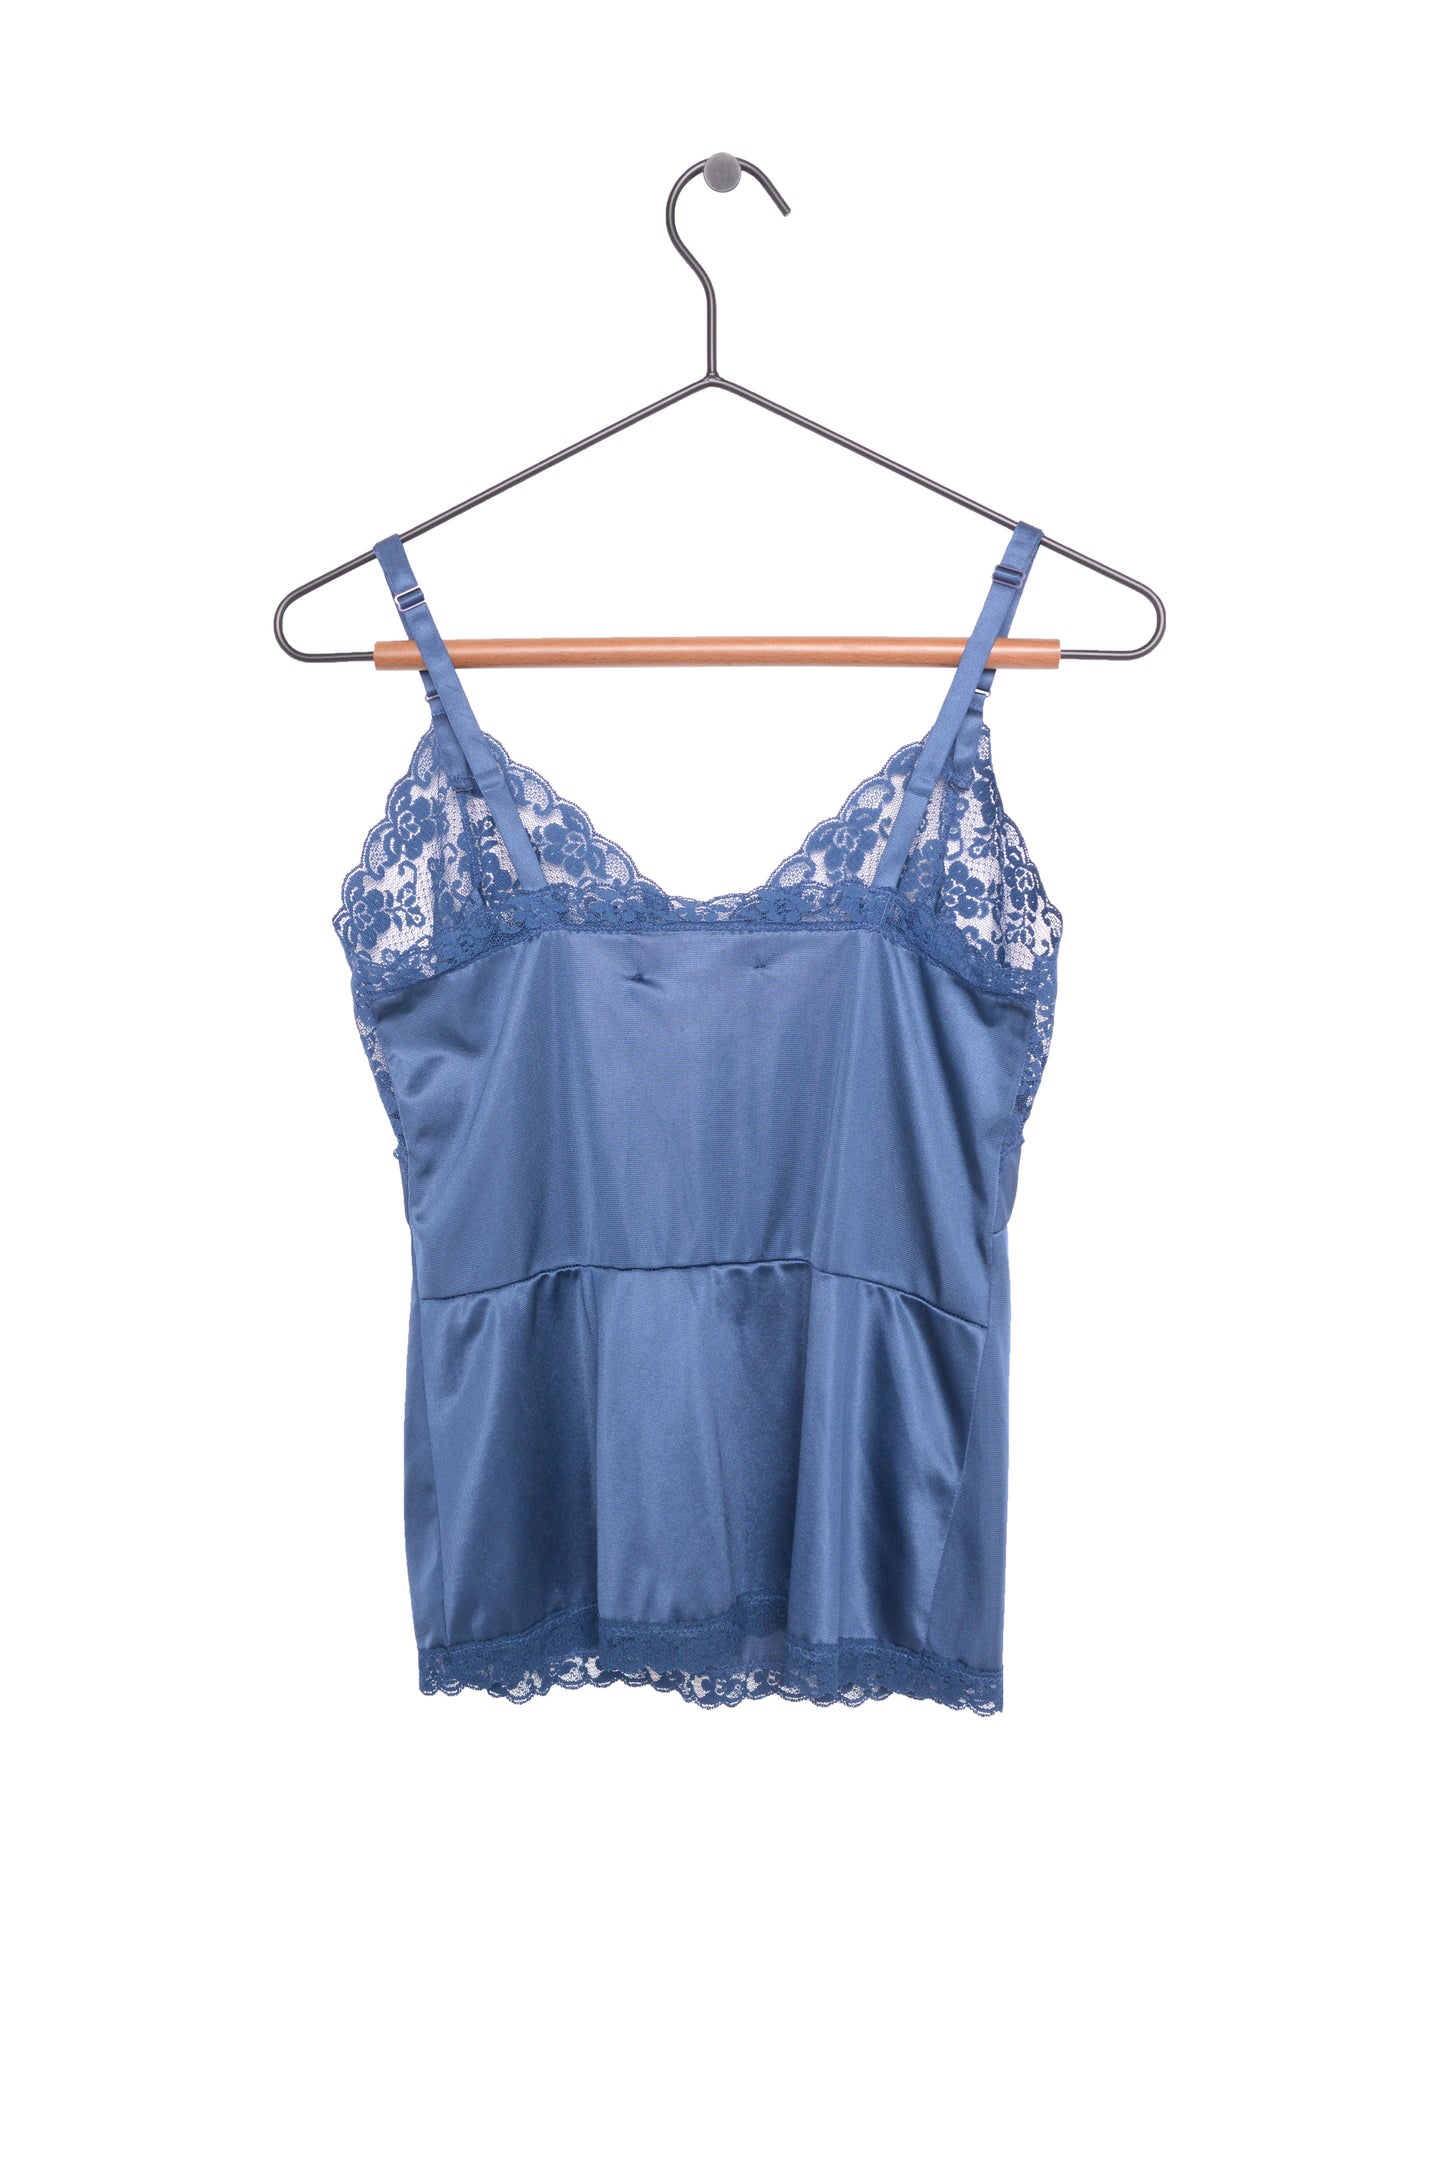 1950s Hand Dyed Lace Slip Top